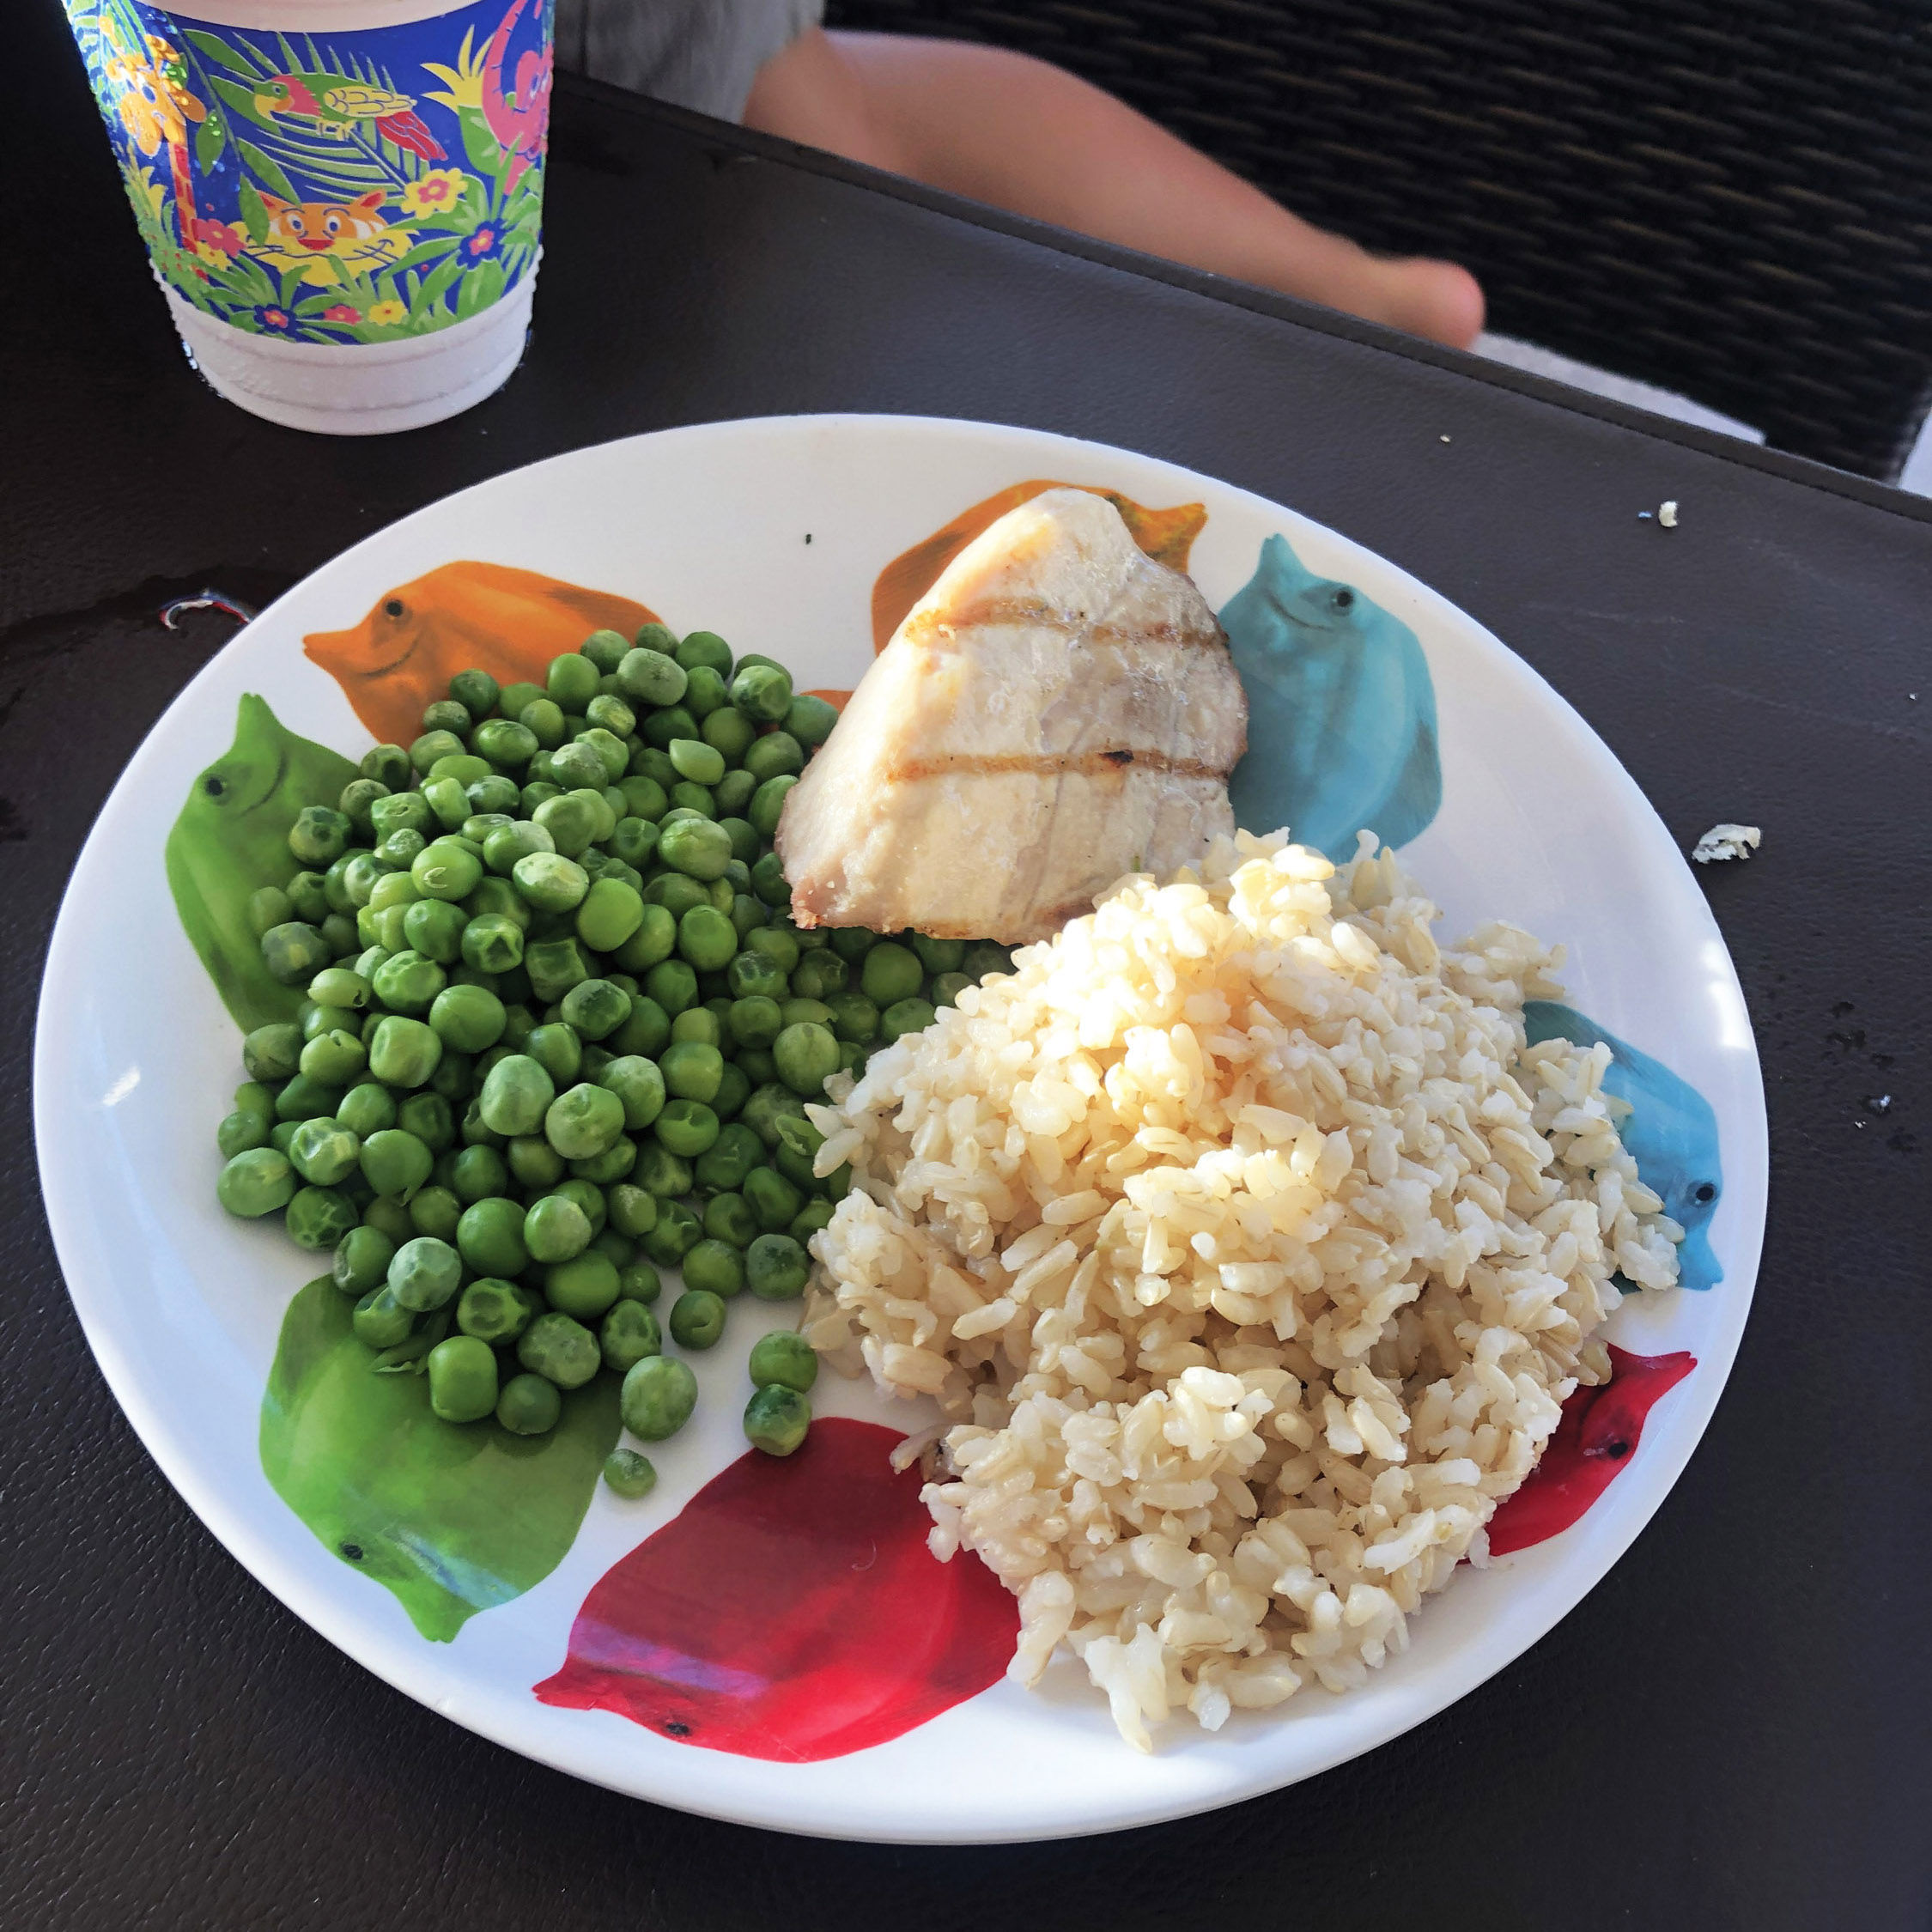 Grilled fish, peas and rice available as part of the resort's "keiki menu" offerings.